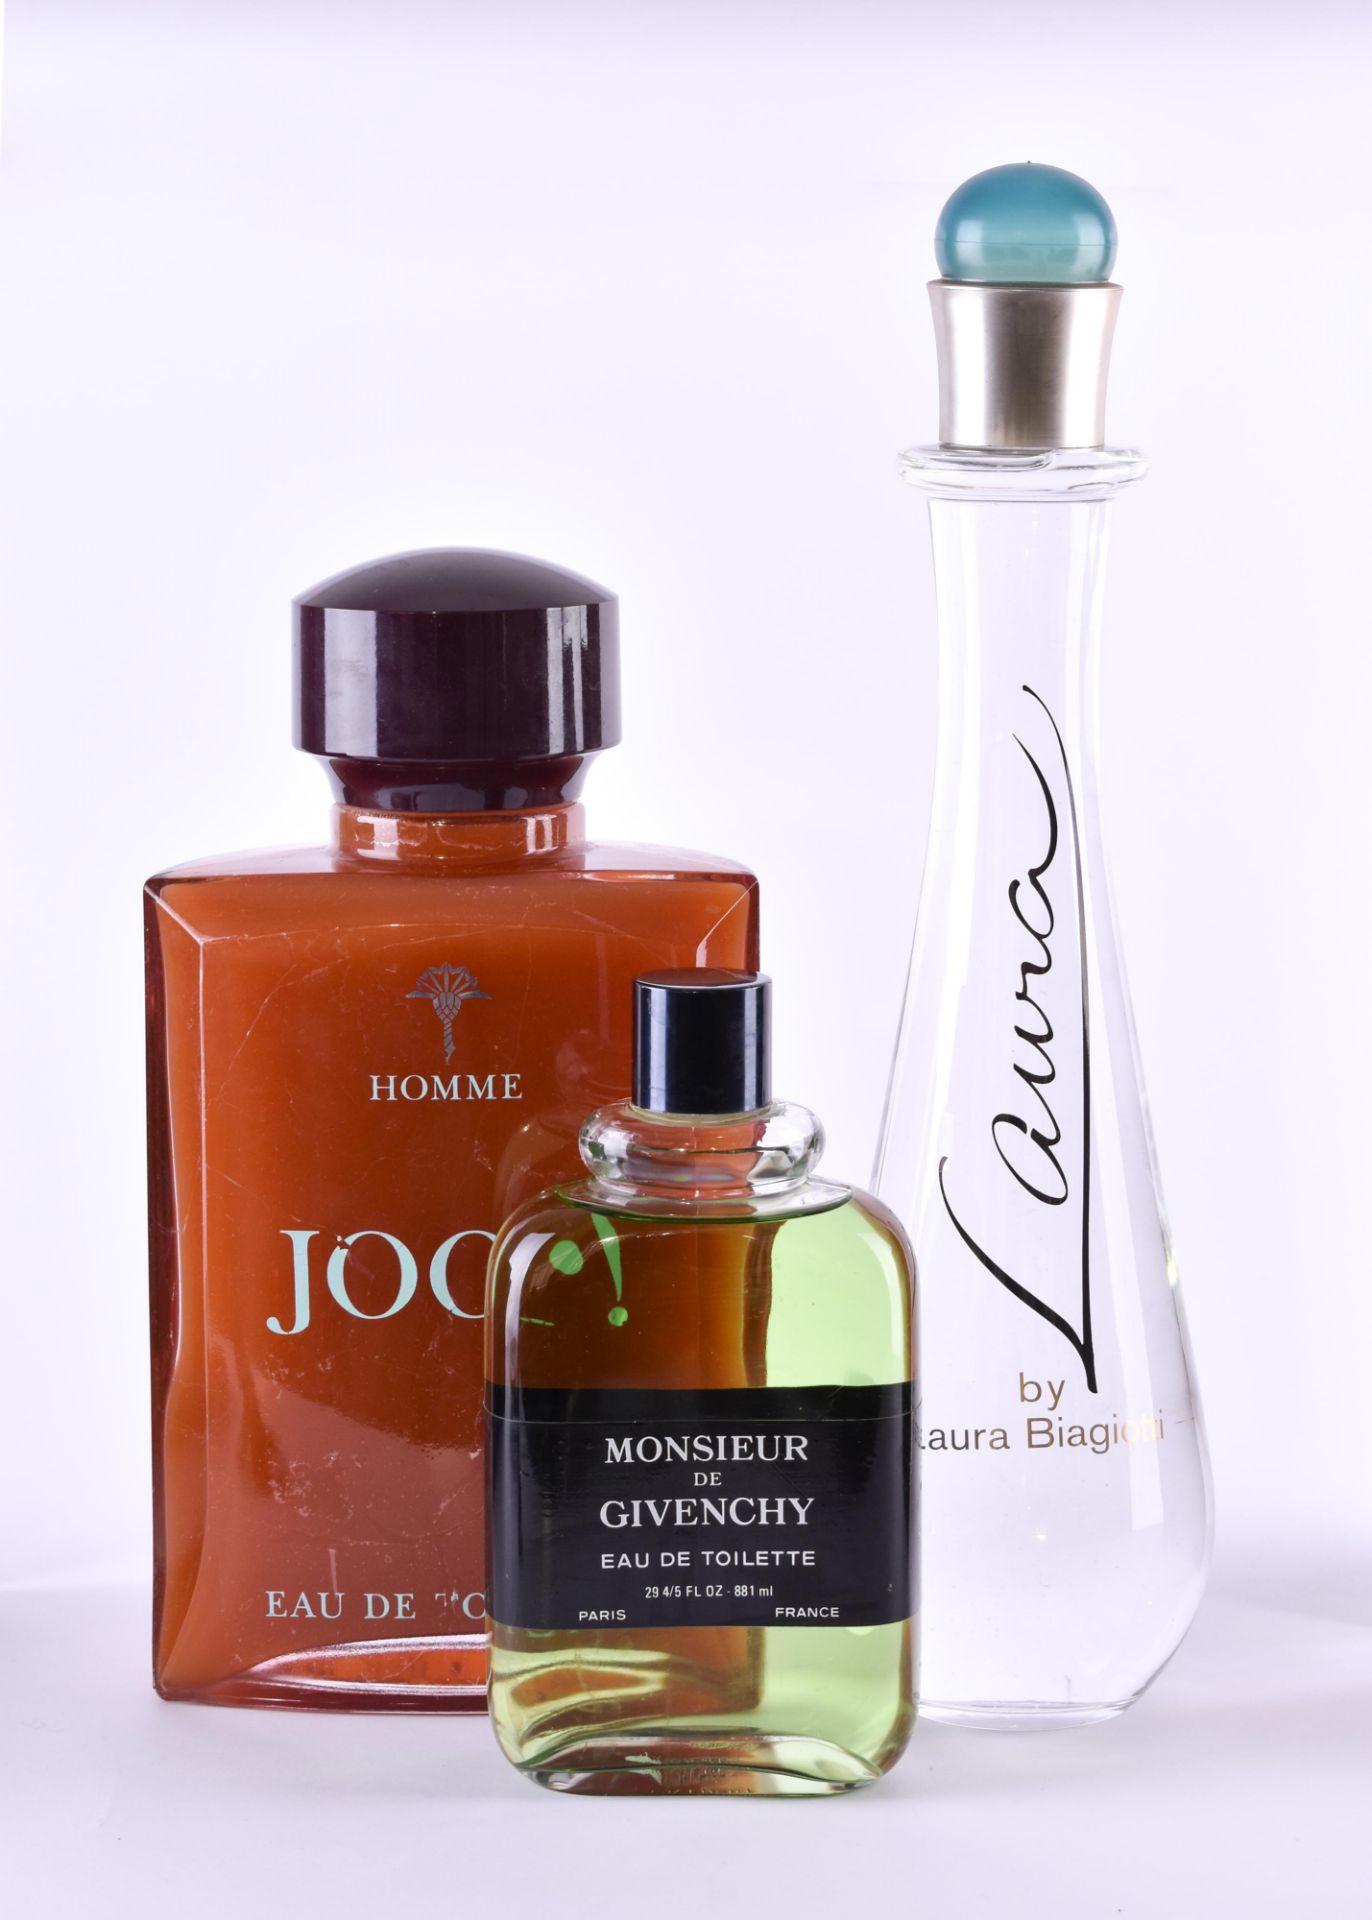 3 big facticeincluded, Monsieur de Givenchy (height: 23 cm), Joop Homme (height: 33 cm) and Laura at